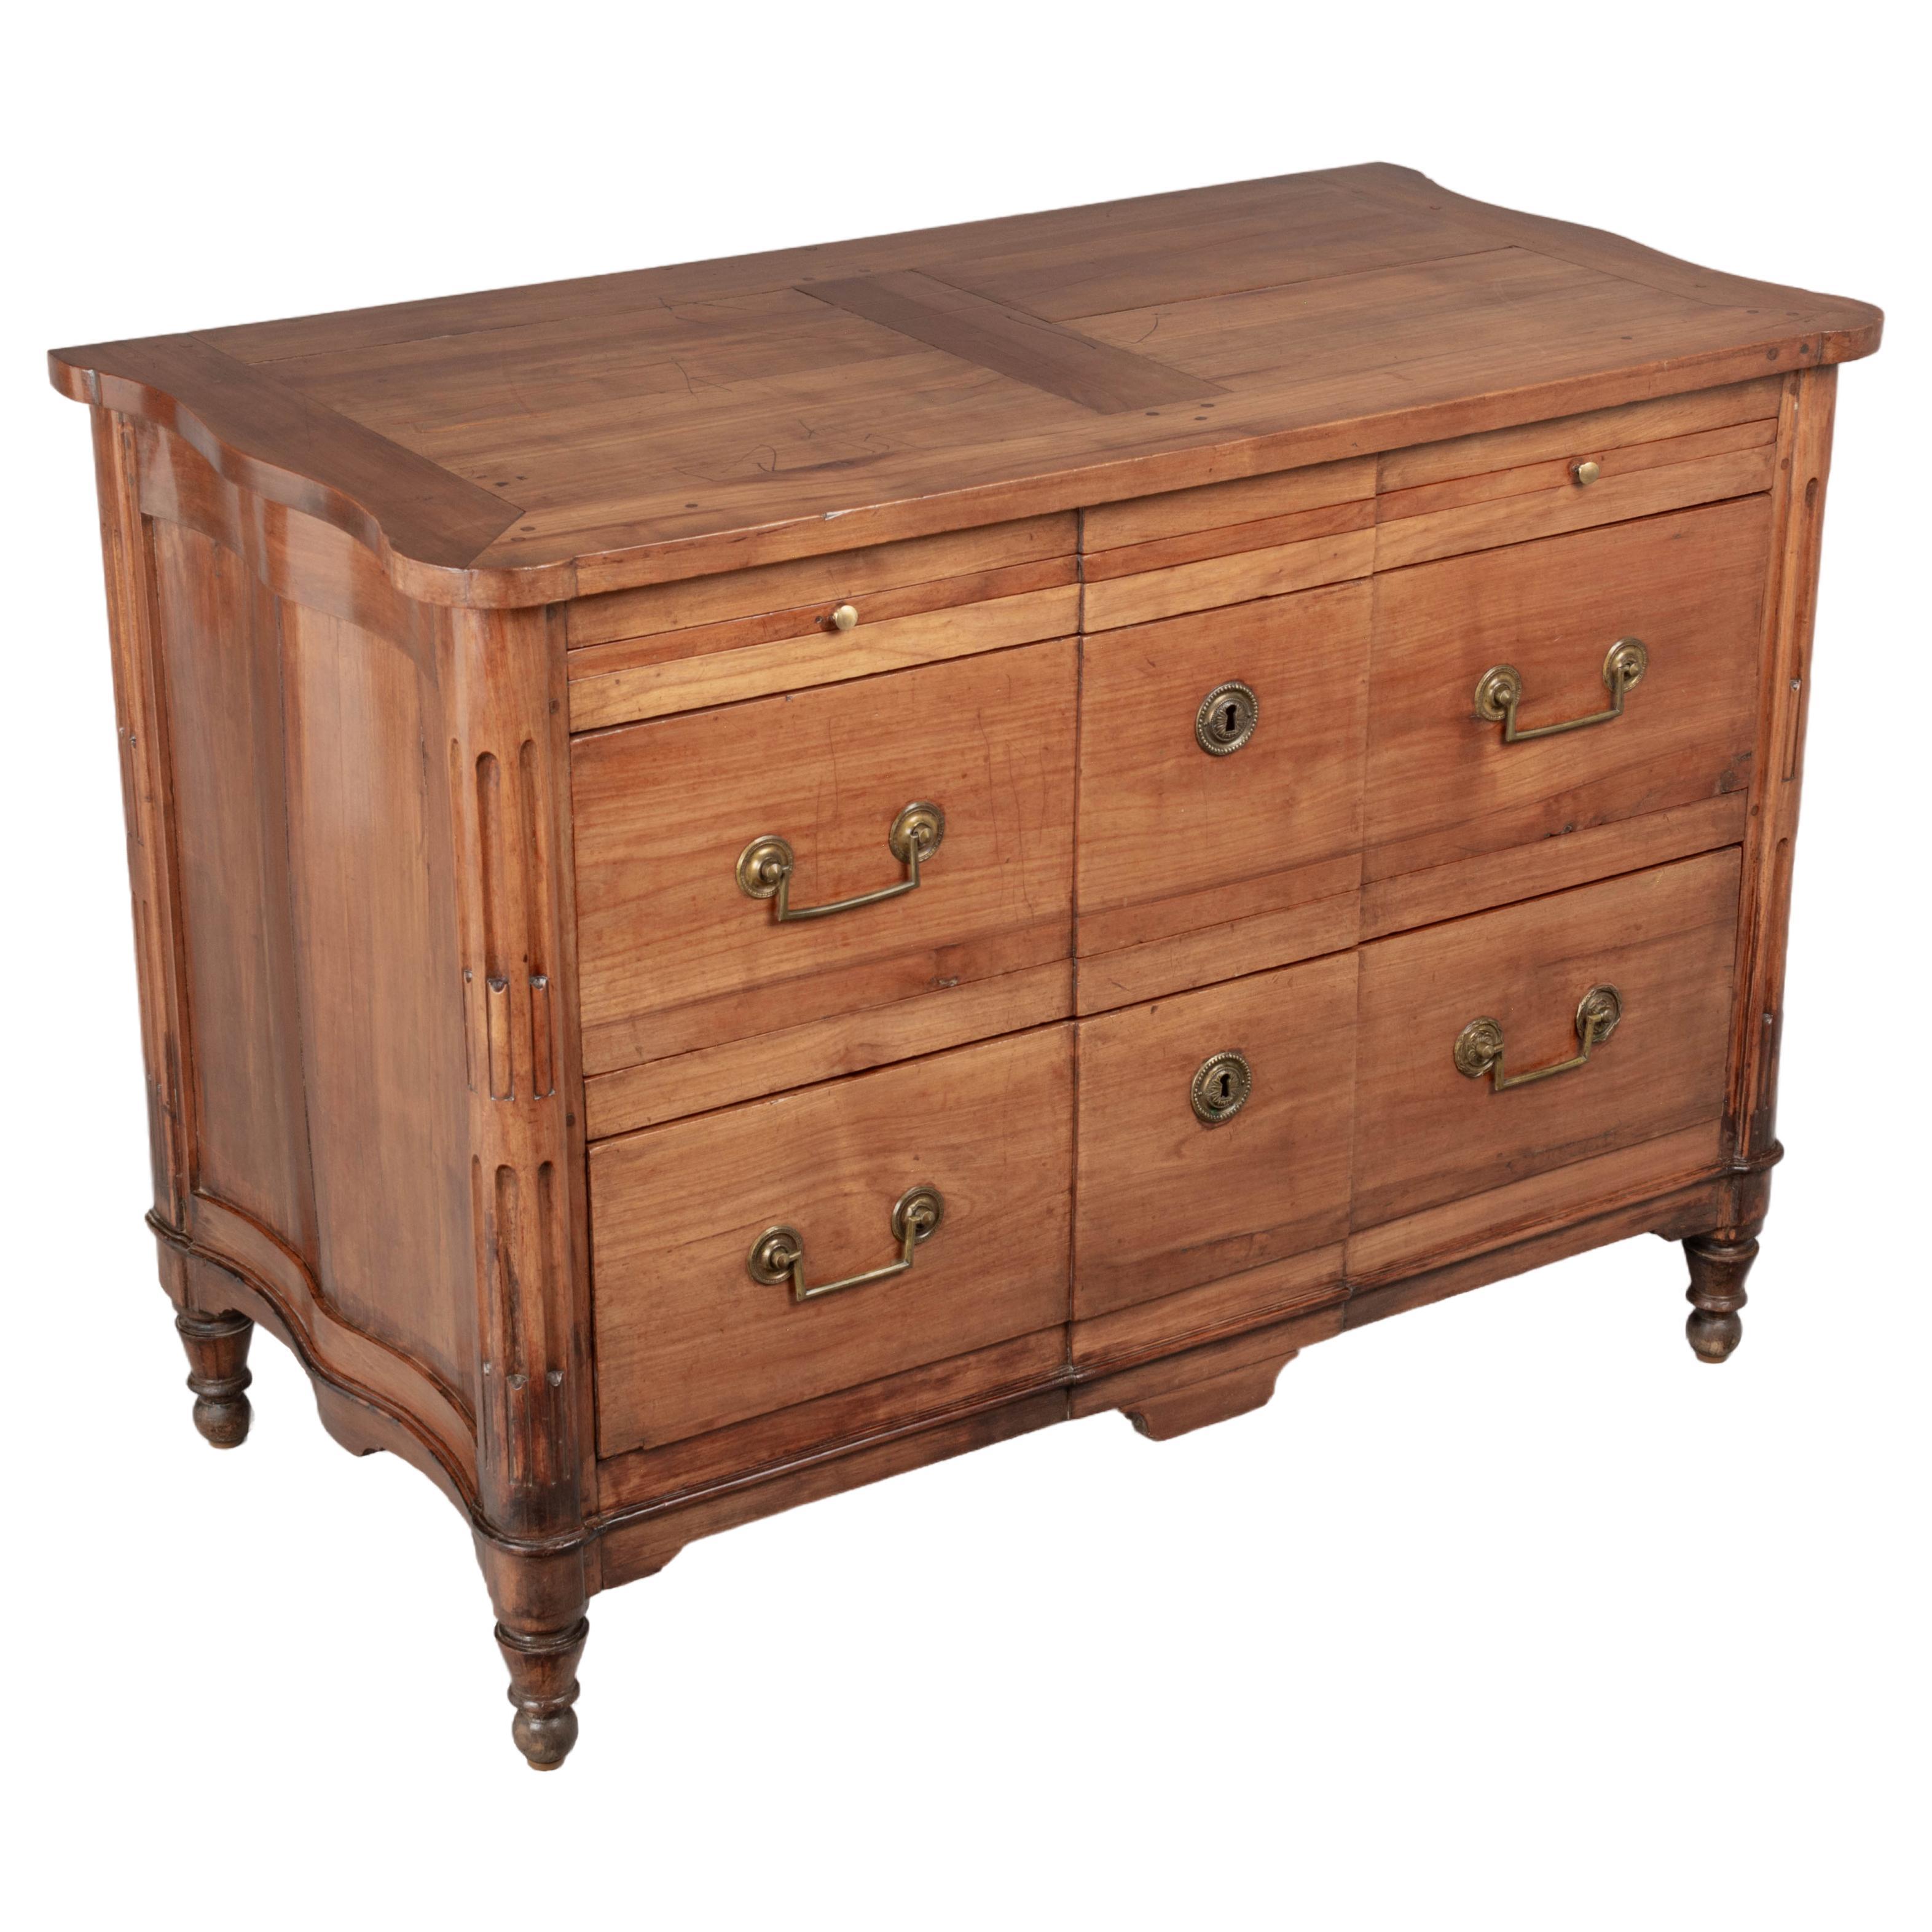 An early 19th Century French Directoire Period commode made of solid cherry wood with yellow pine as a secondary wood. Unusual form with serpentine sides. Rounded fluted front corners with short turned tapered legs. A well-crafted chest with two